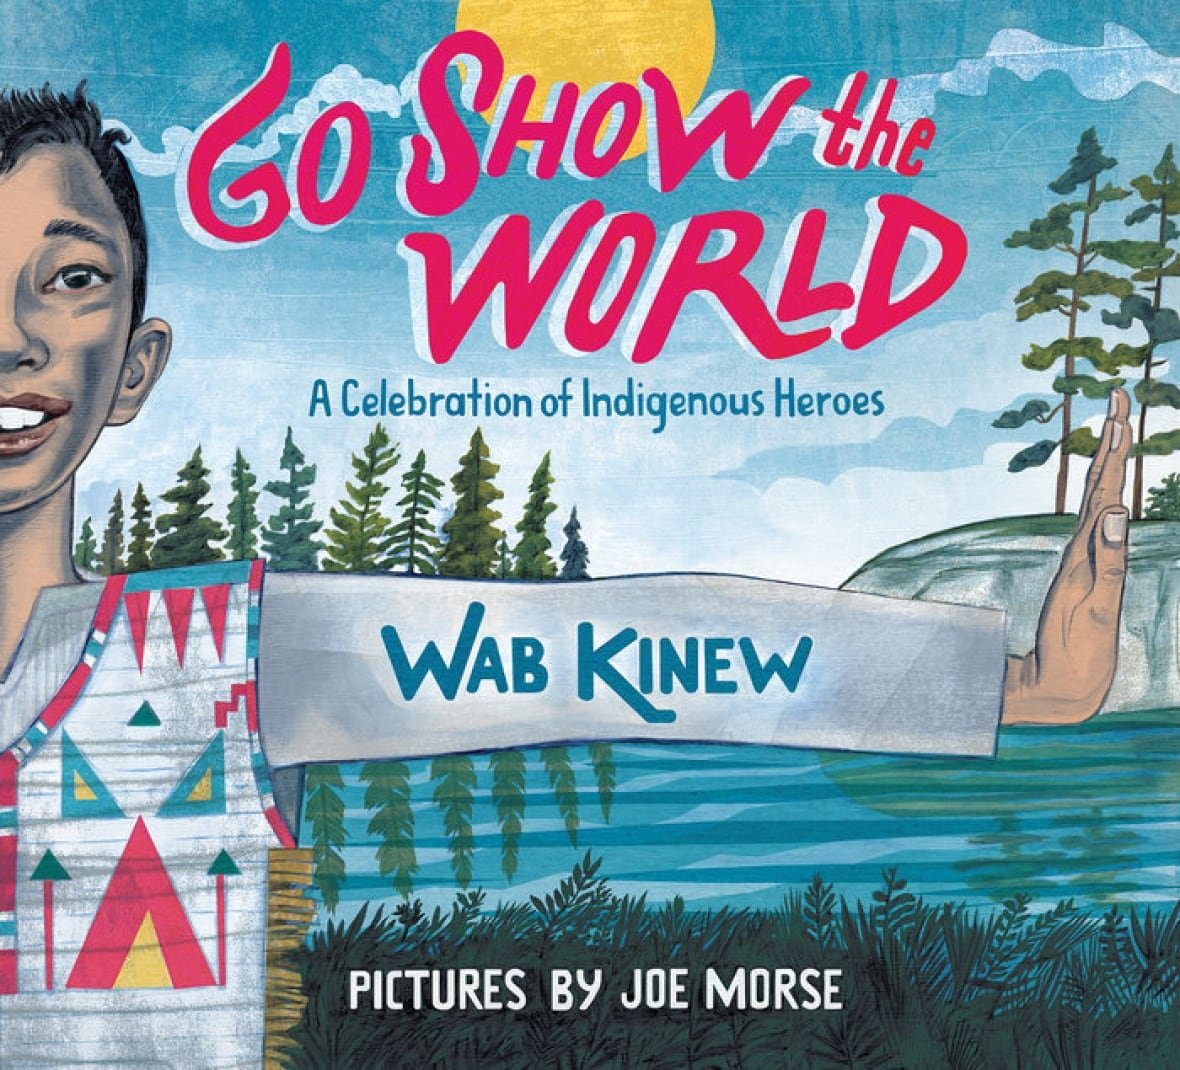 book-cover-go-show-the-world-by-wab-kinew.jpg